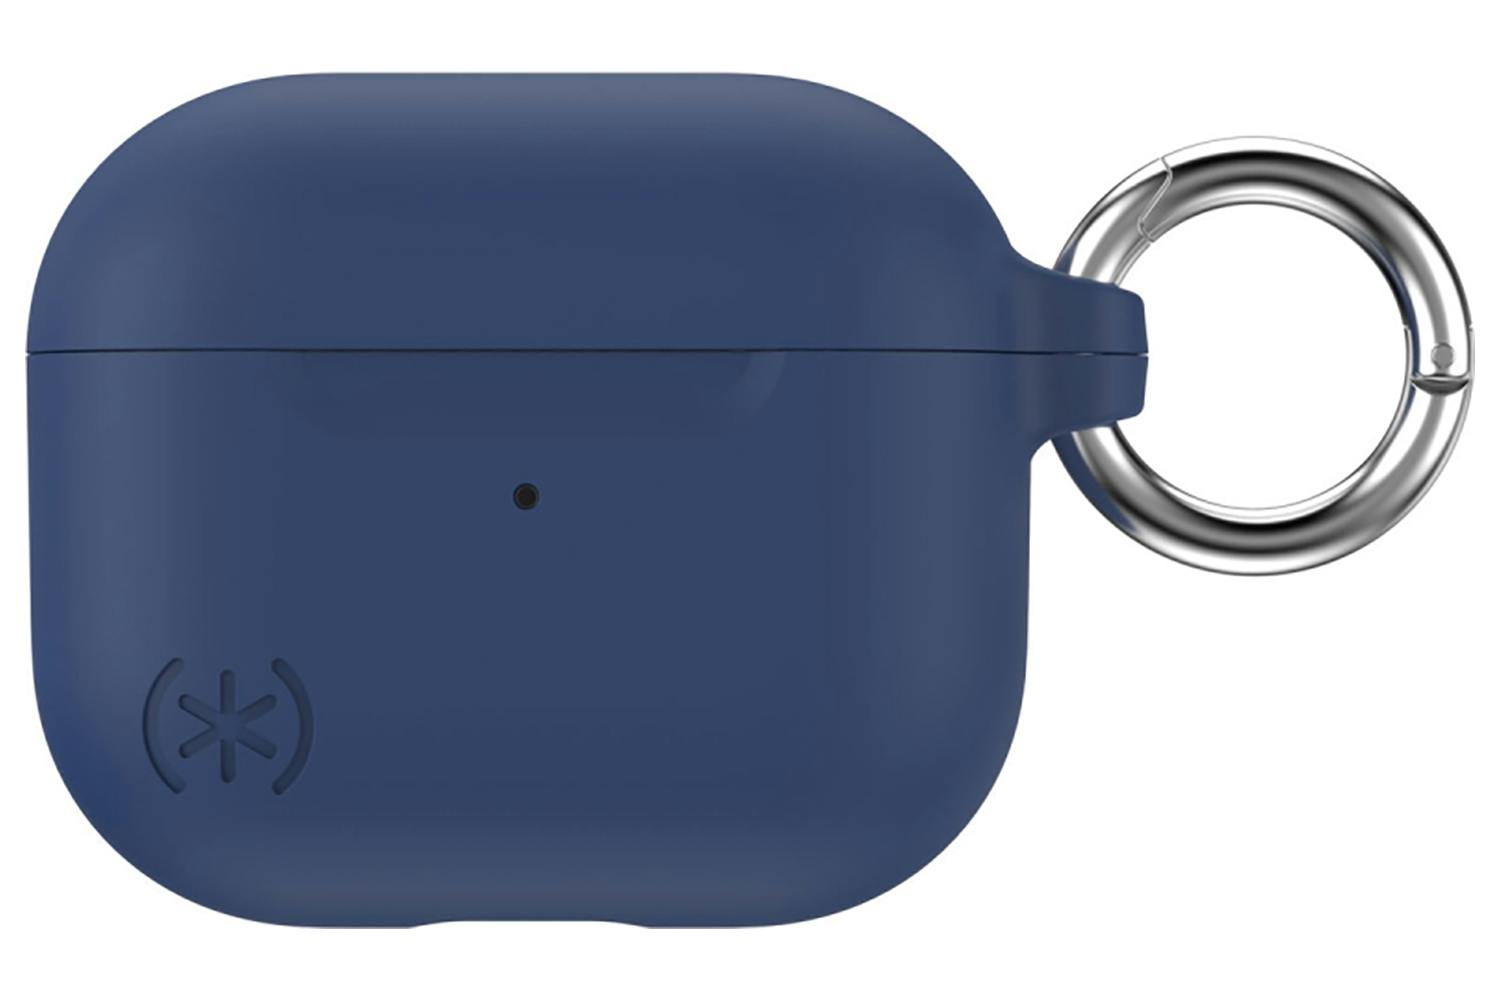 Speck Airpods 3rd Generation Charging Case | Blue